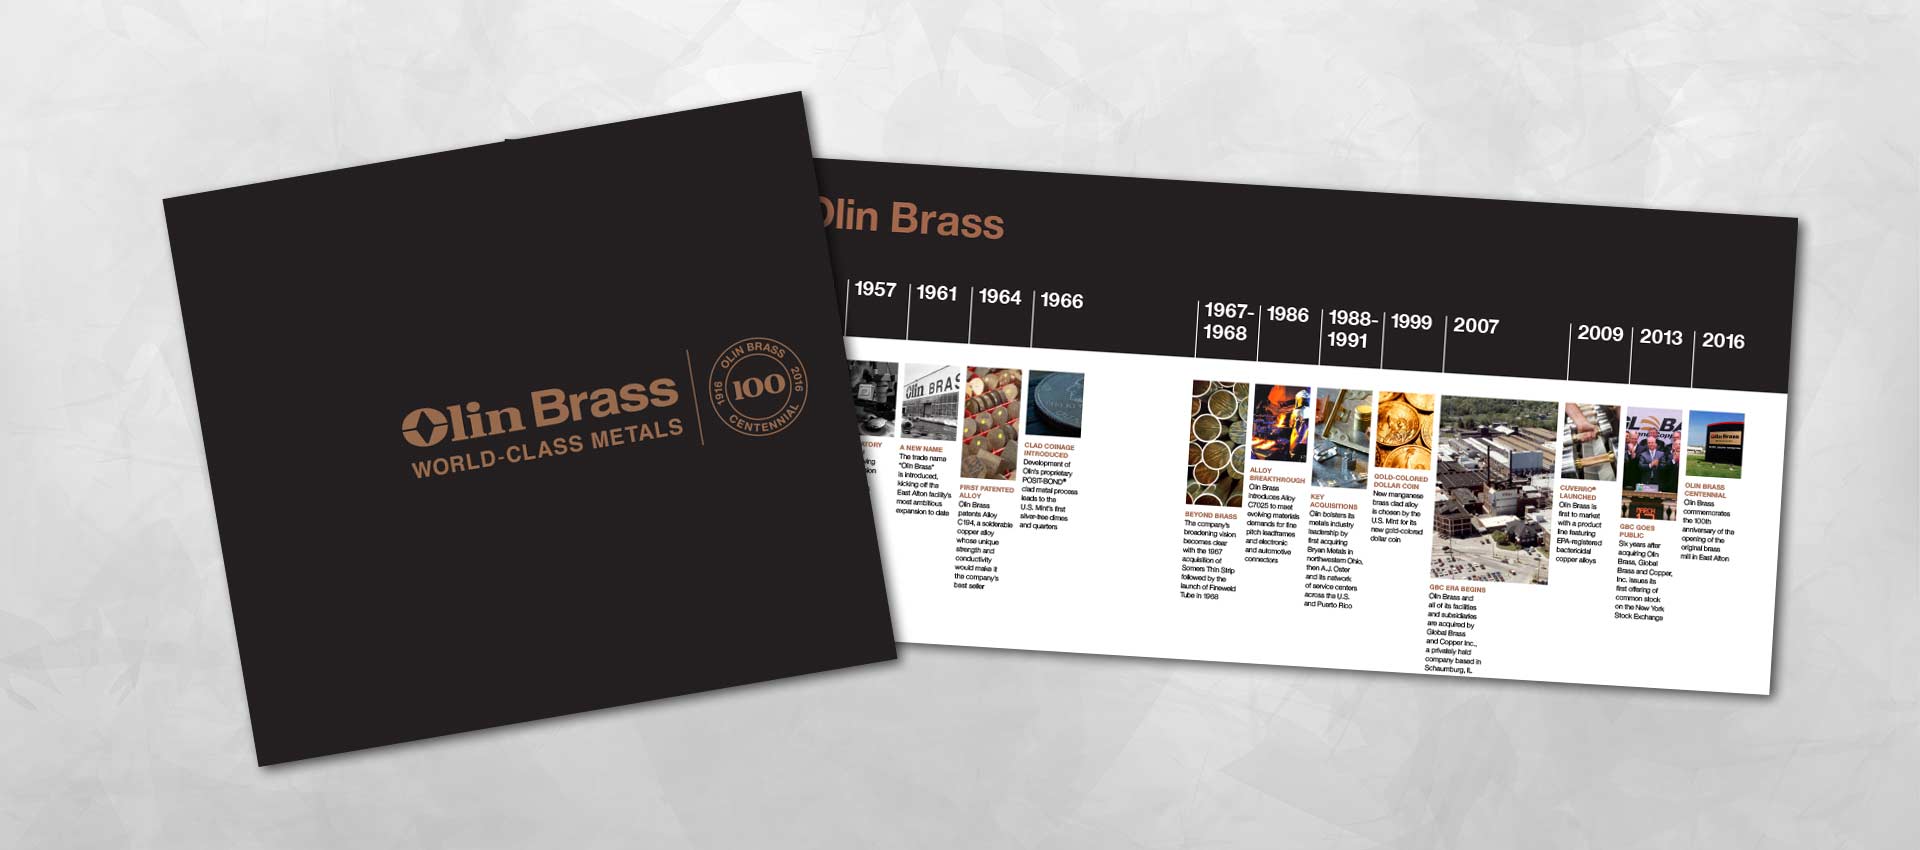 Olin Brass product booklet